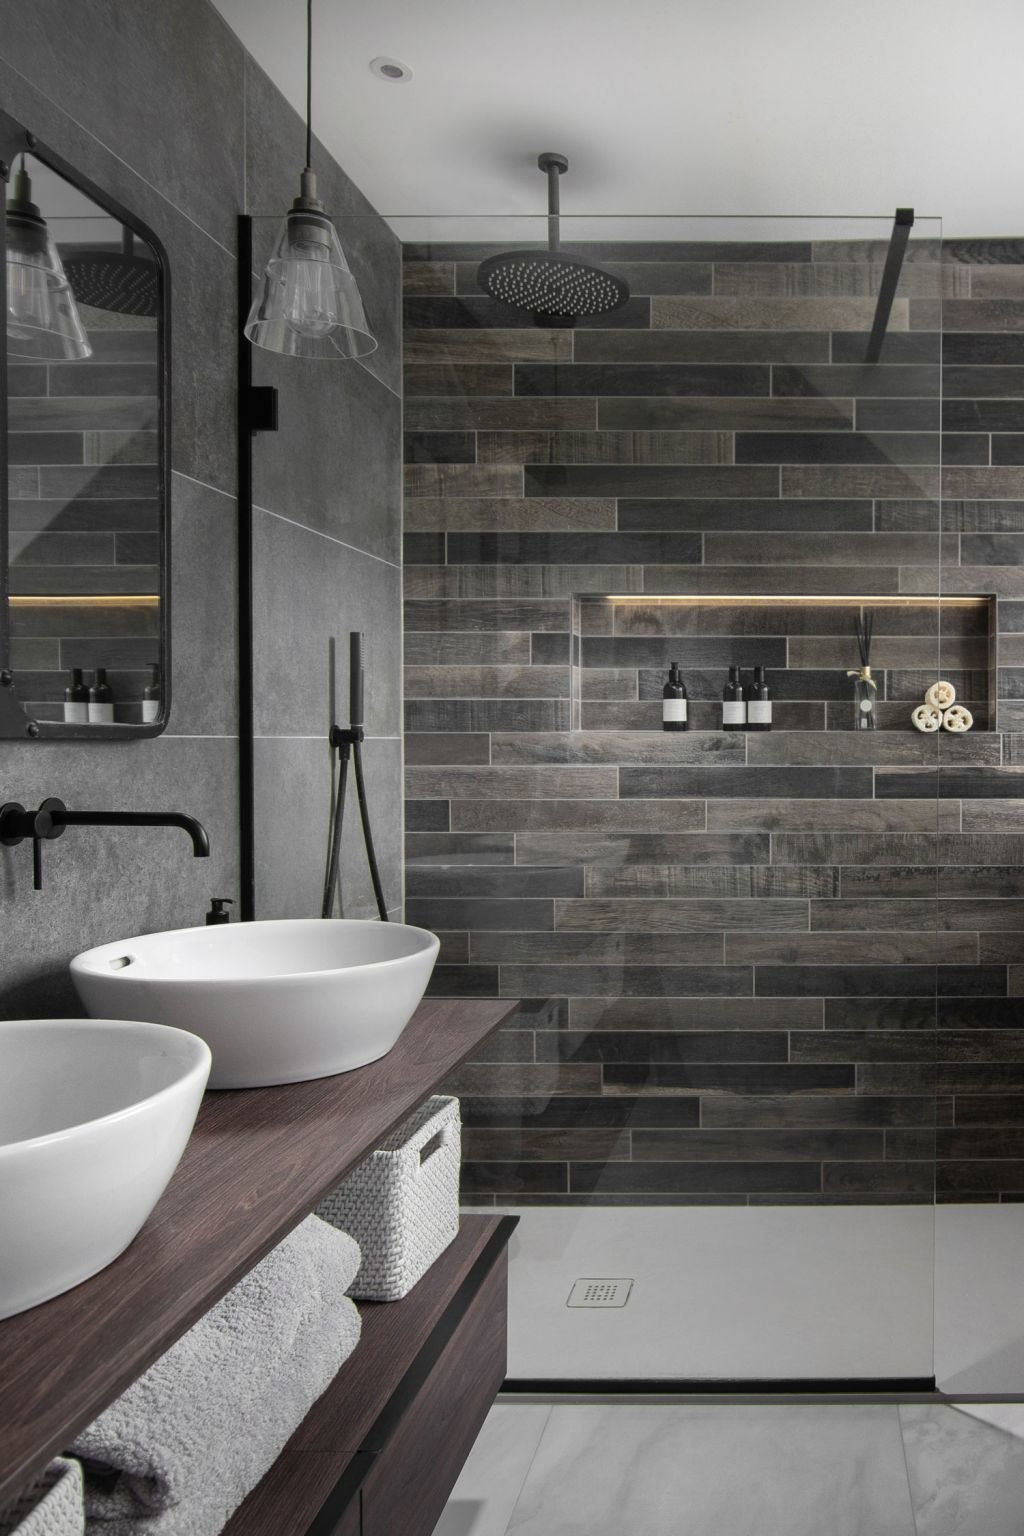 Bathroom design: architects and designers reveal the six biggest mistakes people make